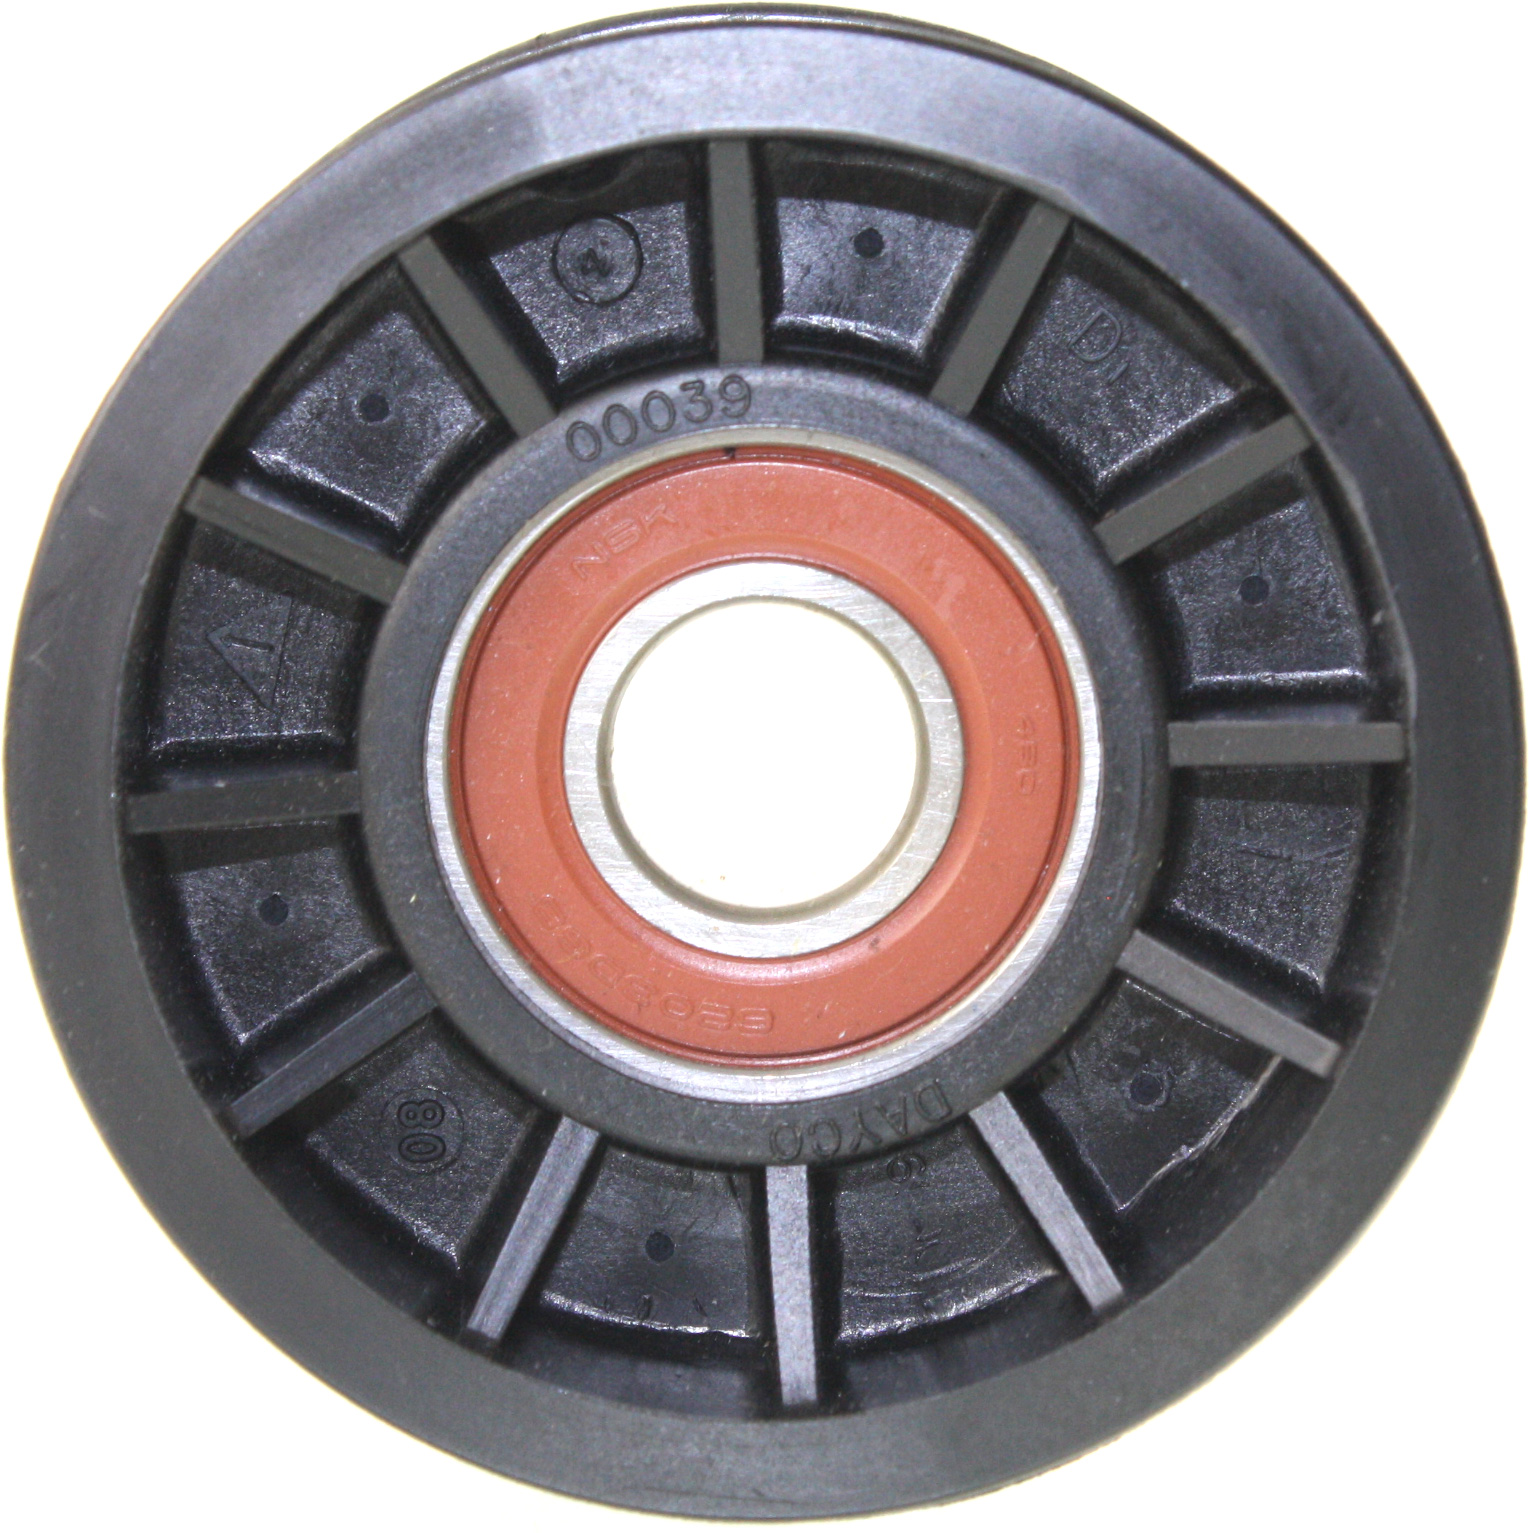 Dayco 89003 Tensioner & Idler Pulley 